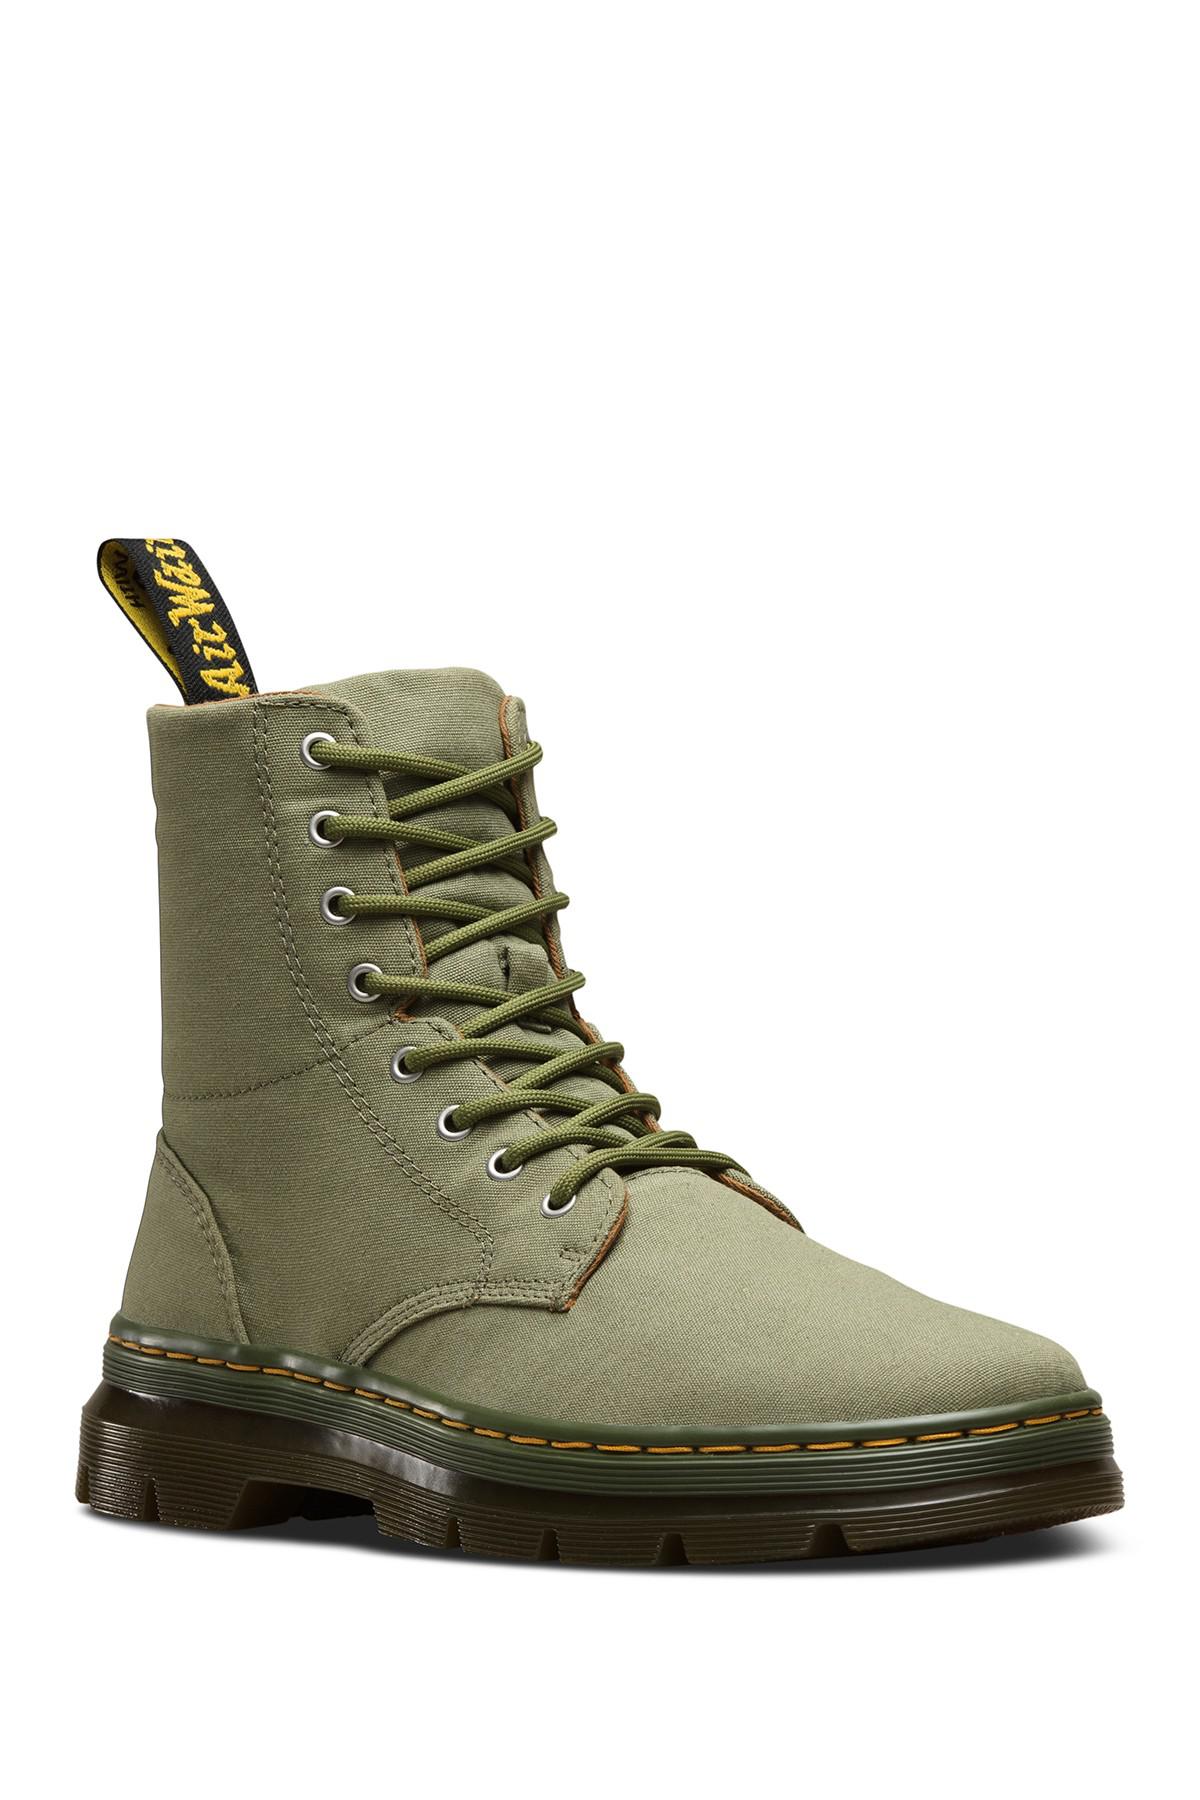 Dr. Martens Combs Mid Khaki Boot in 